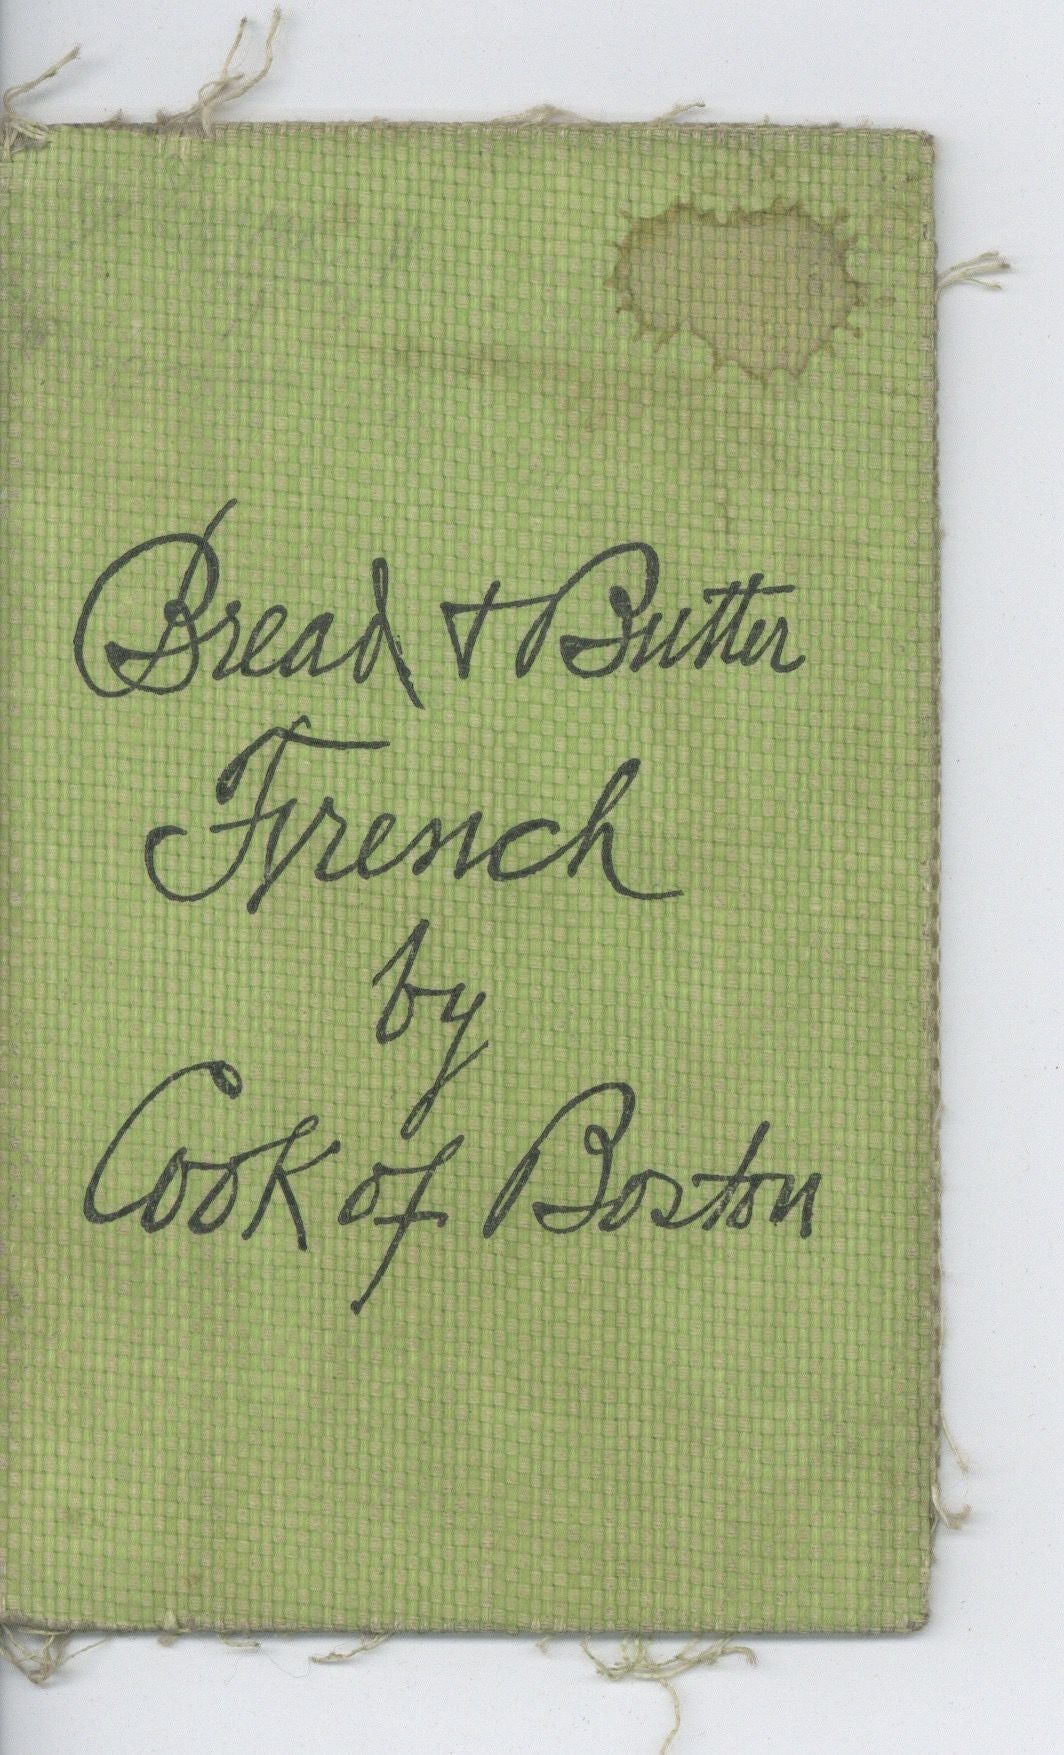 Item #5037 Bread & Butter French. C. S. Cook.